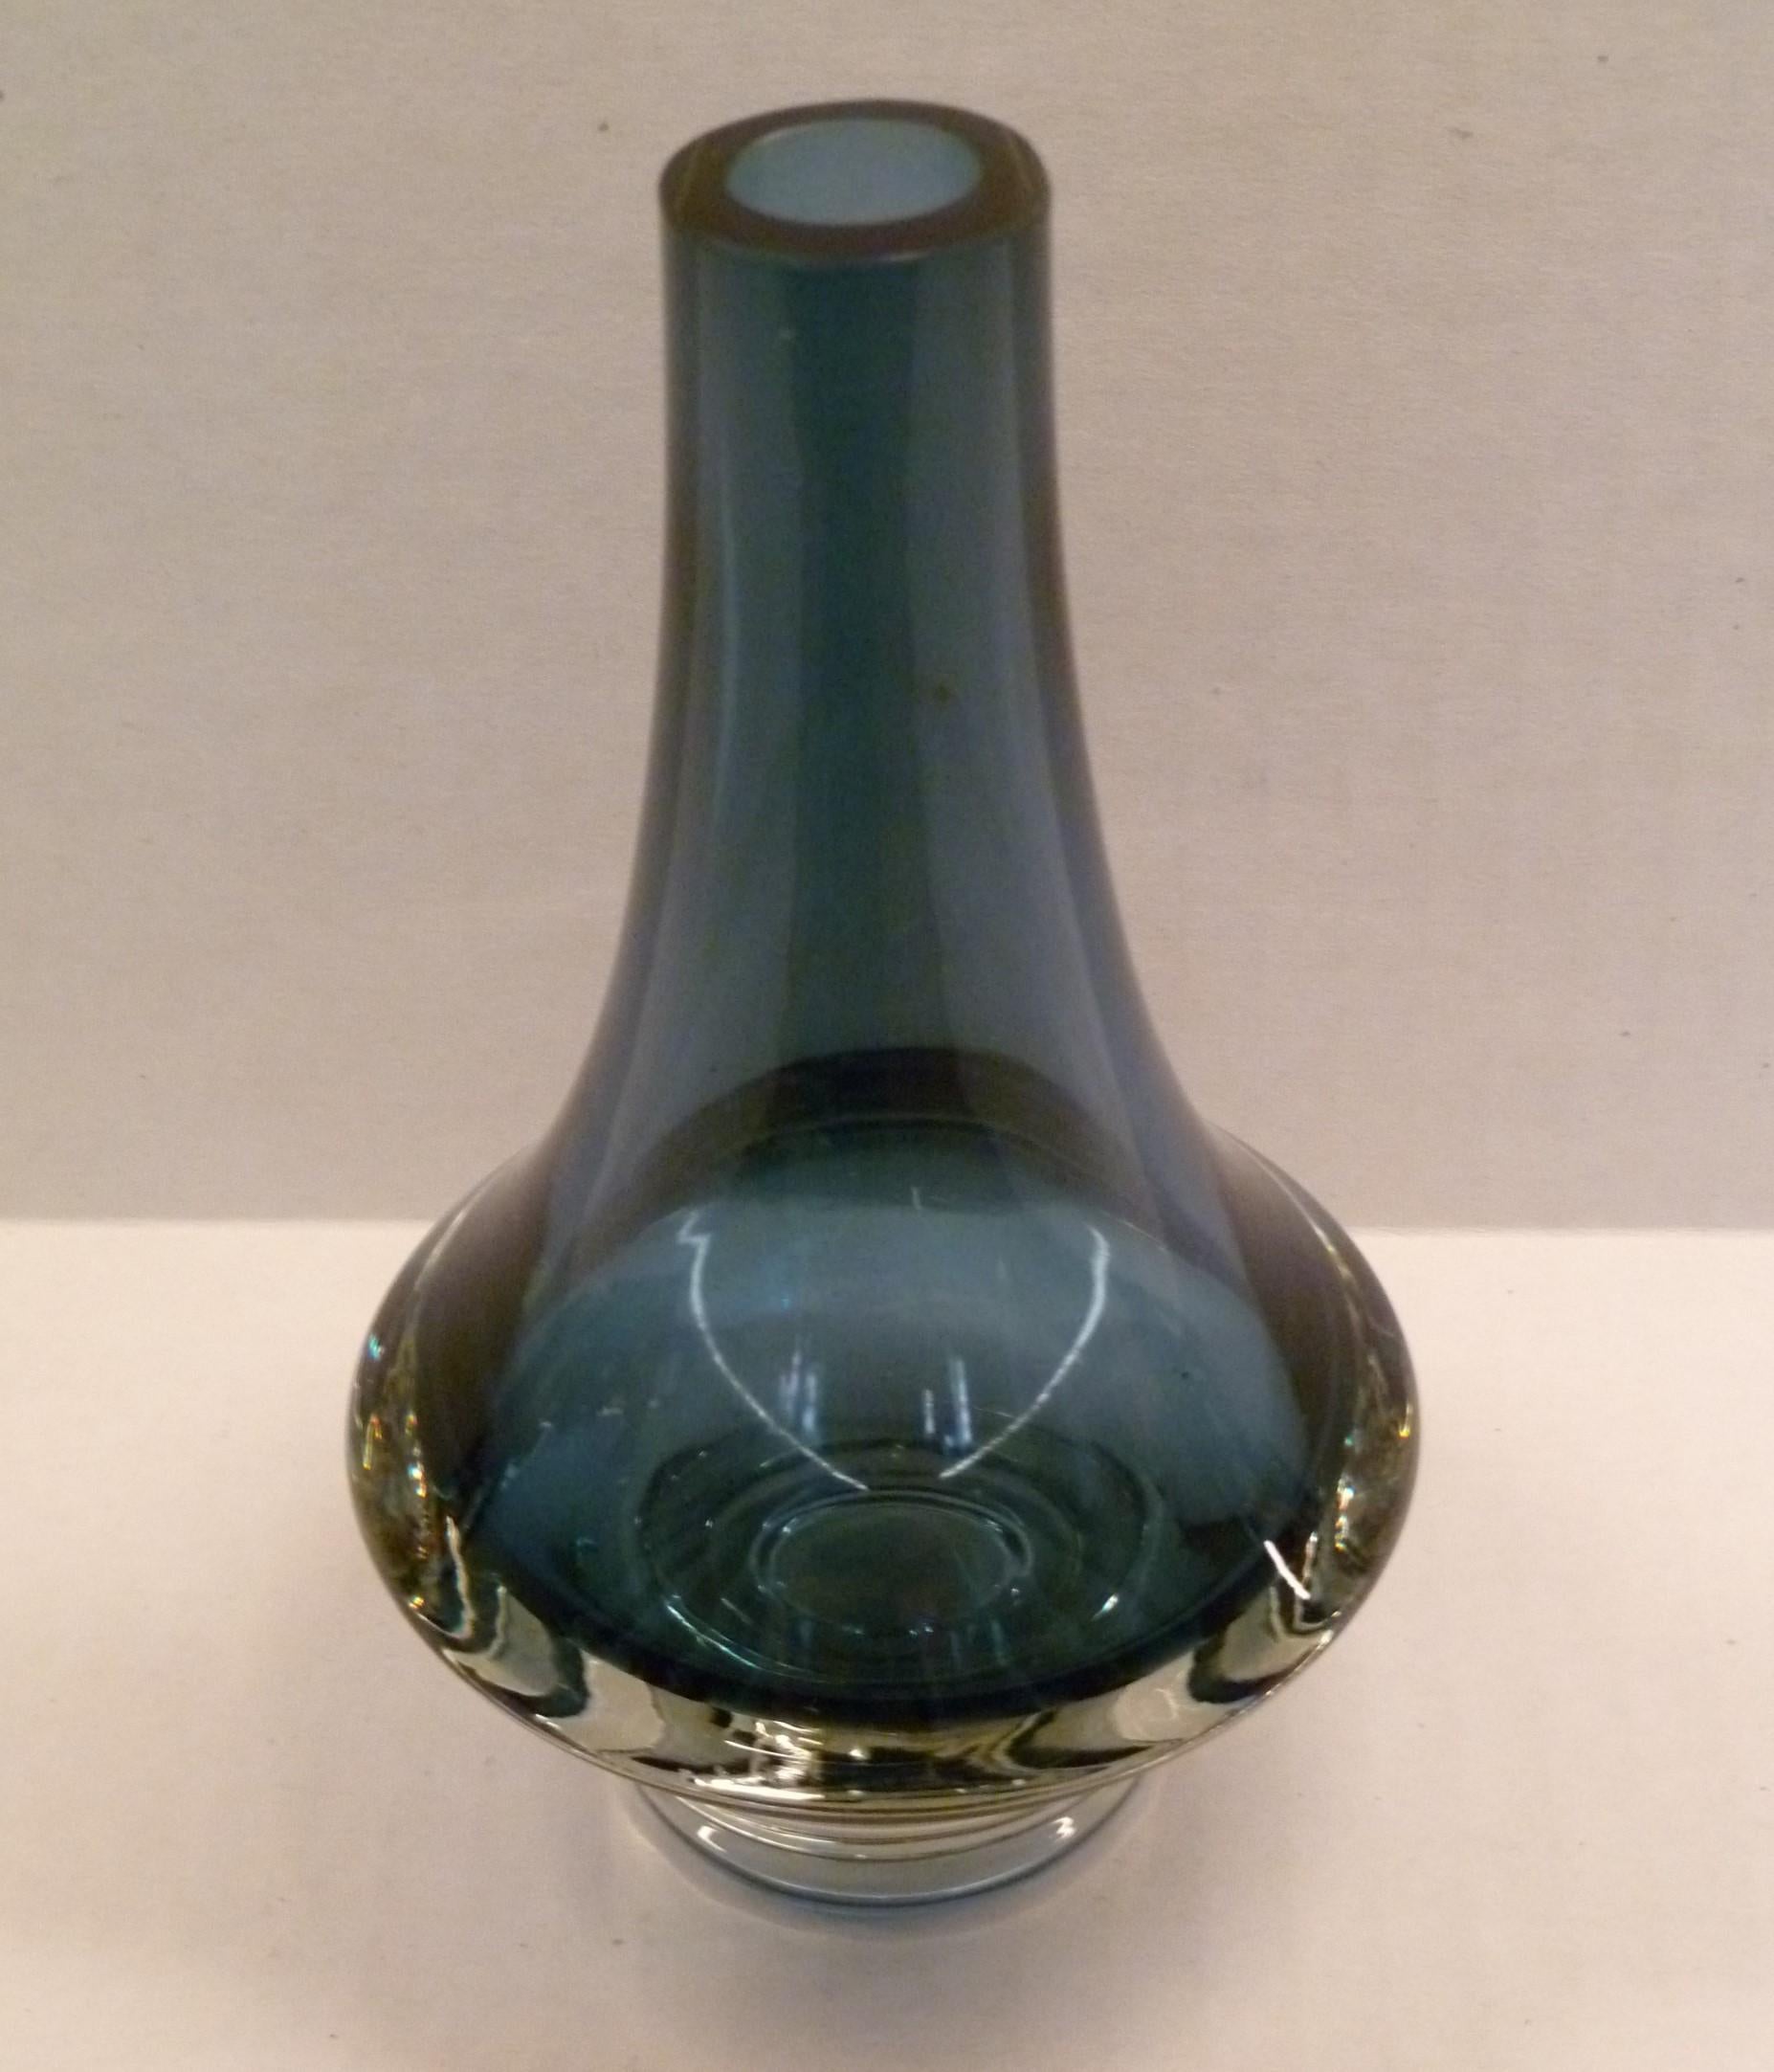 Finnish modern glass vase by Erkkitapio Siiroinen (1944-1996) for Riihimaki, Finland. From 1970 in dark blue-gray body color with a clear thick base engraved with model # 1379 on the bottom.

Riihimaki was founded in 1910 and became the largest